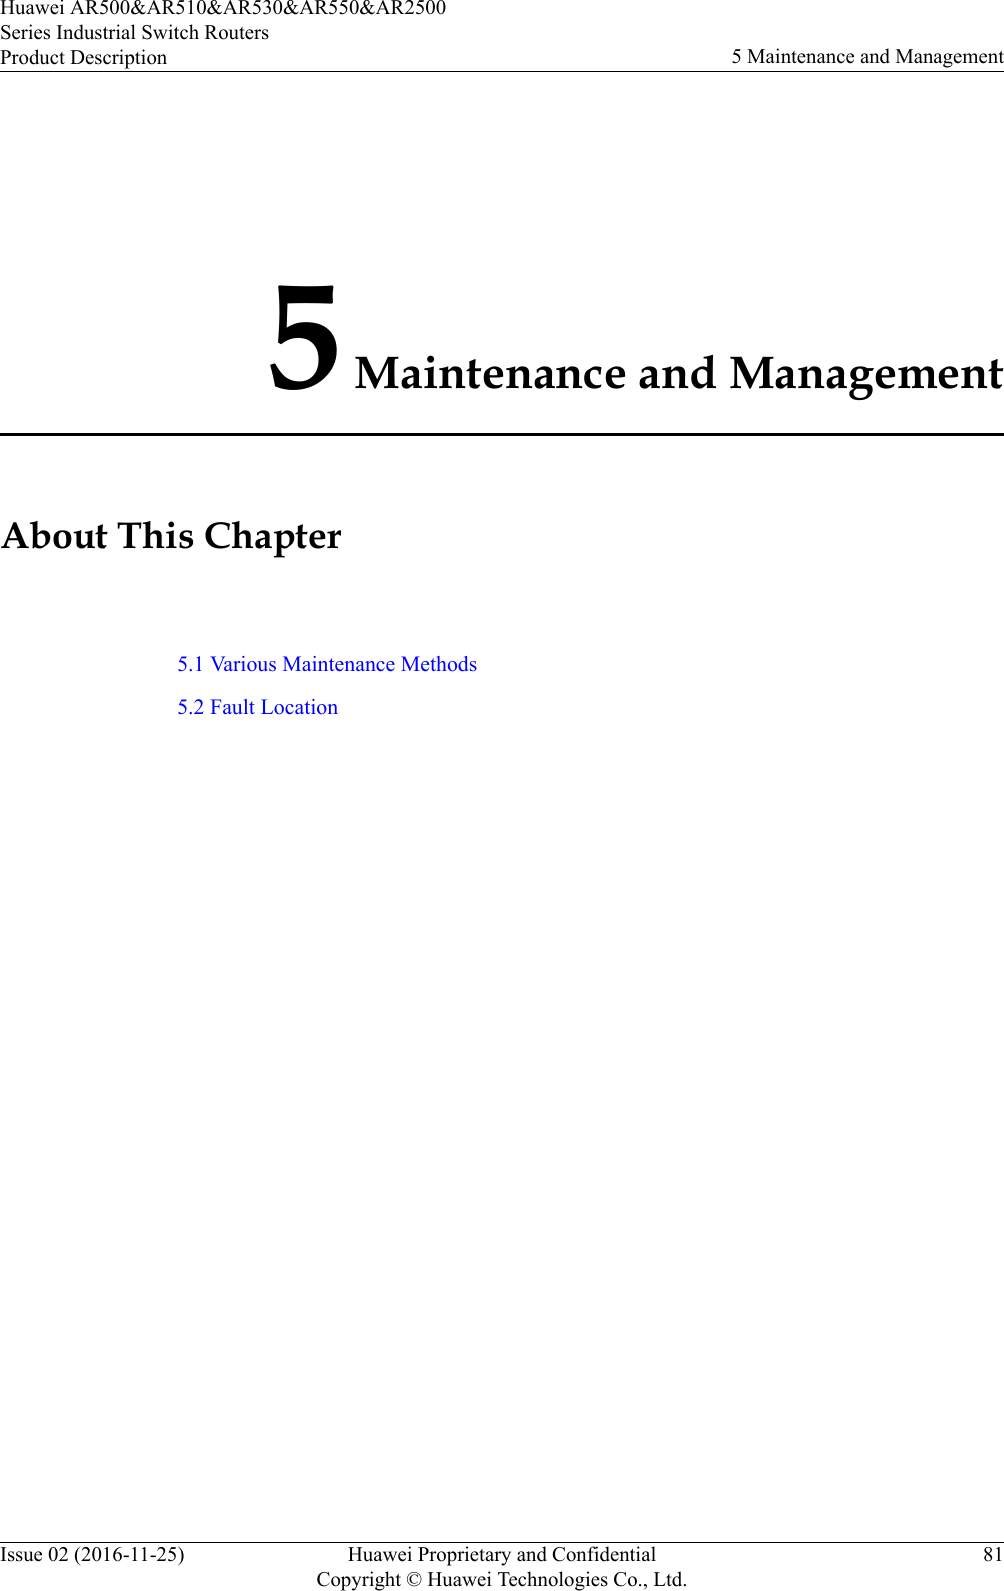 5 Maintenance and ManagementAbout This Chapter5.1 Various Maintenance Methods5.2 Fault LocationHuawei AR500&amp;AR510&amp;AR530&amp;AR550&amp;AR2500Series Industrial Switch RoutersProduct Description 5 Maintenance and ManagementIssue 02 (2016-11-25) Huawei Proprietary and ConfidentialCopyright © Huawei Technologies Co., Ltd.81